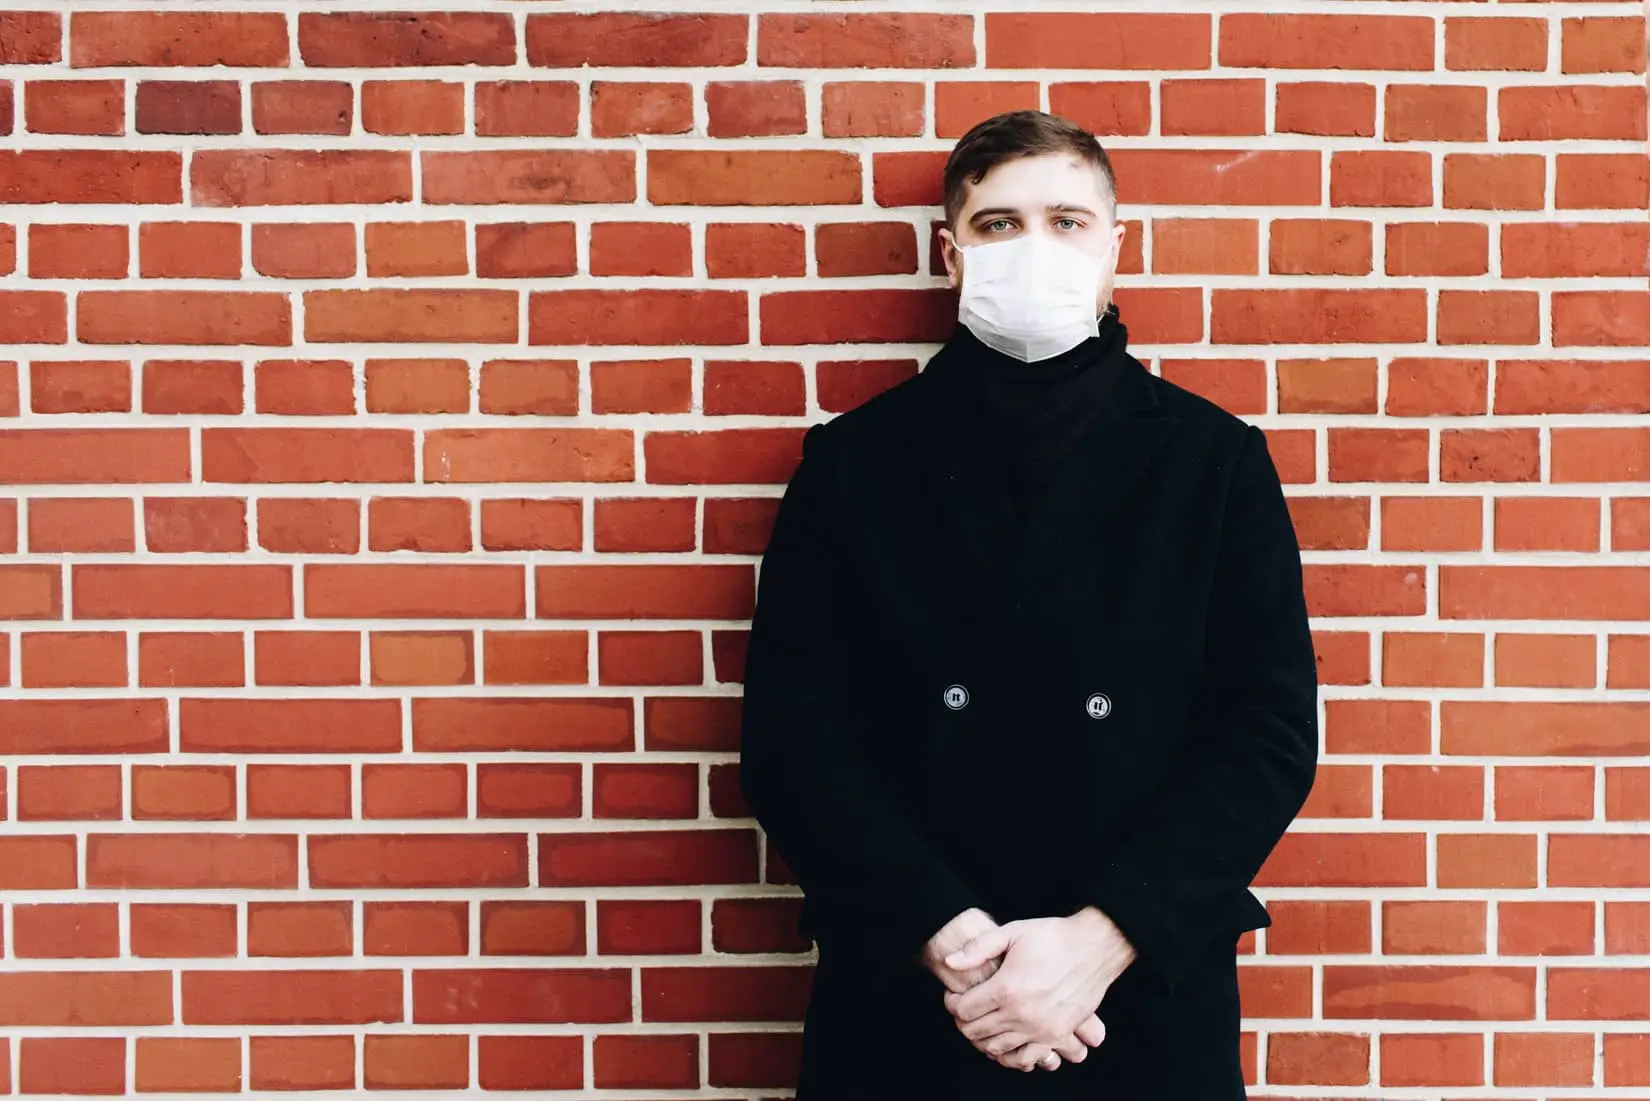 Man with mask standing against brick wall